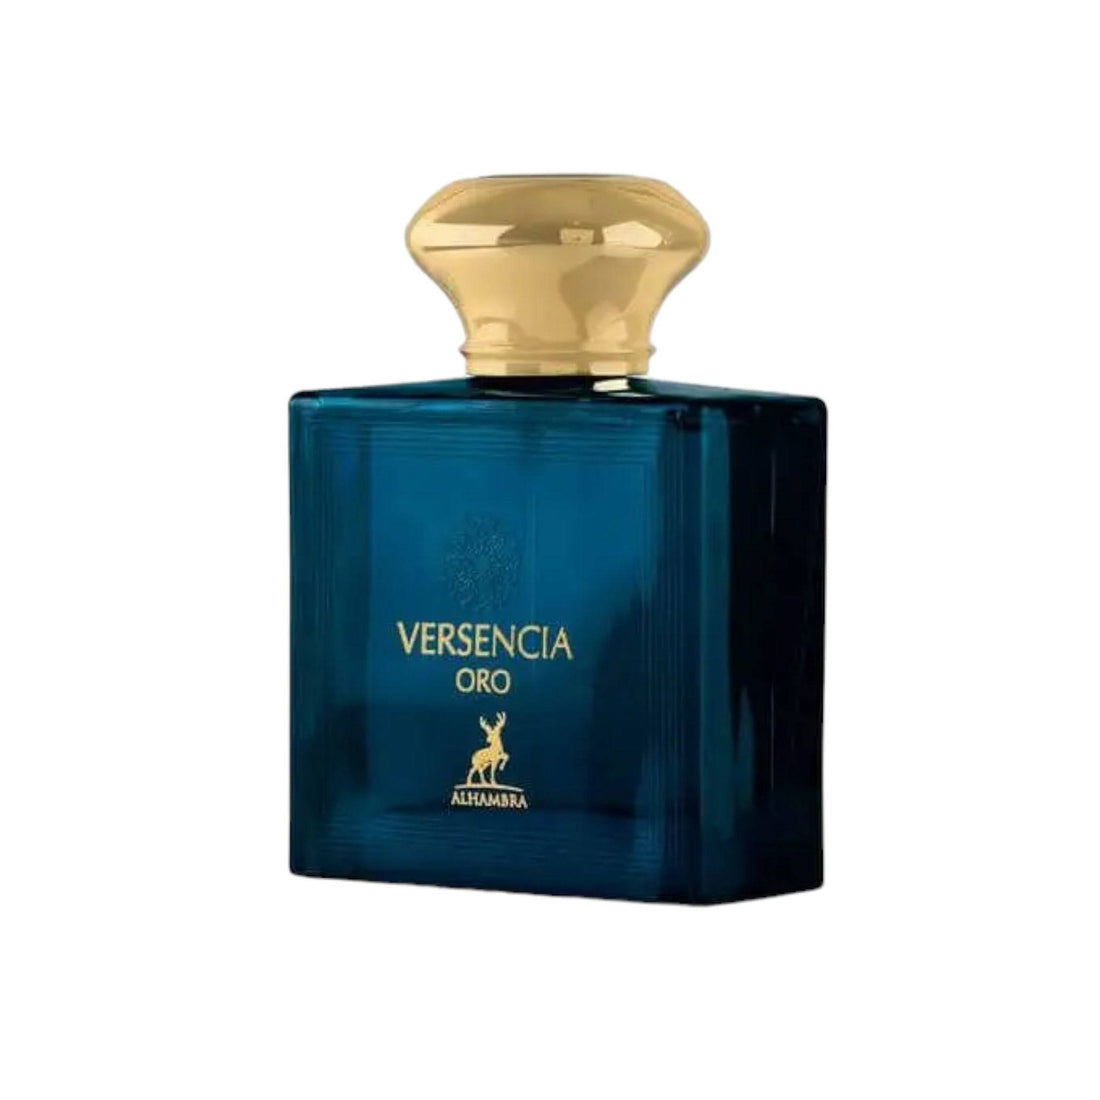 Sophisticated 100ml bottle of Versencia Oro Perfume by Maison Alhambra, reflecting its unique blend of mint, green apple, and woody notes.